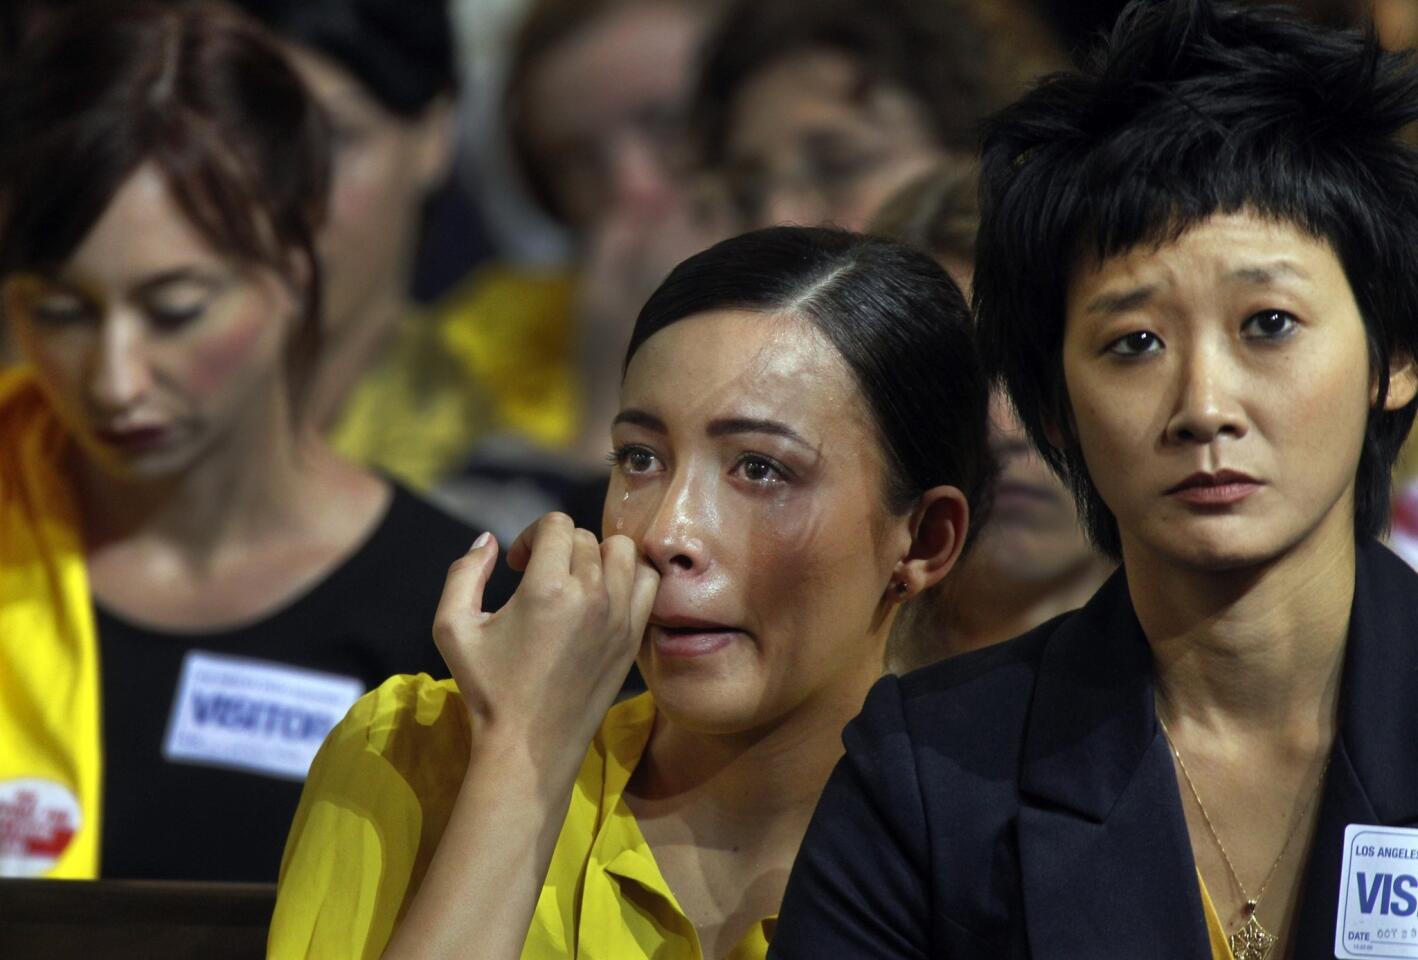 Actress Christian Serratos, center, and Michelle Cho, vice president of the Los Angeles office of the Humane Society, react after watching a video on the use of bullhooks on elephants in traveling circuses. The video was shown by L.A. Councilman Paul Koretz. The council decided to seek a ban on the use of bullhooks in Los Angeles.